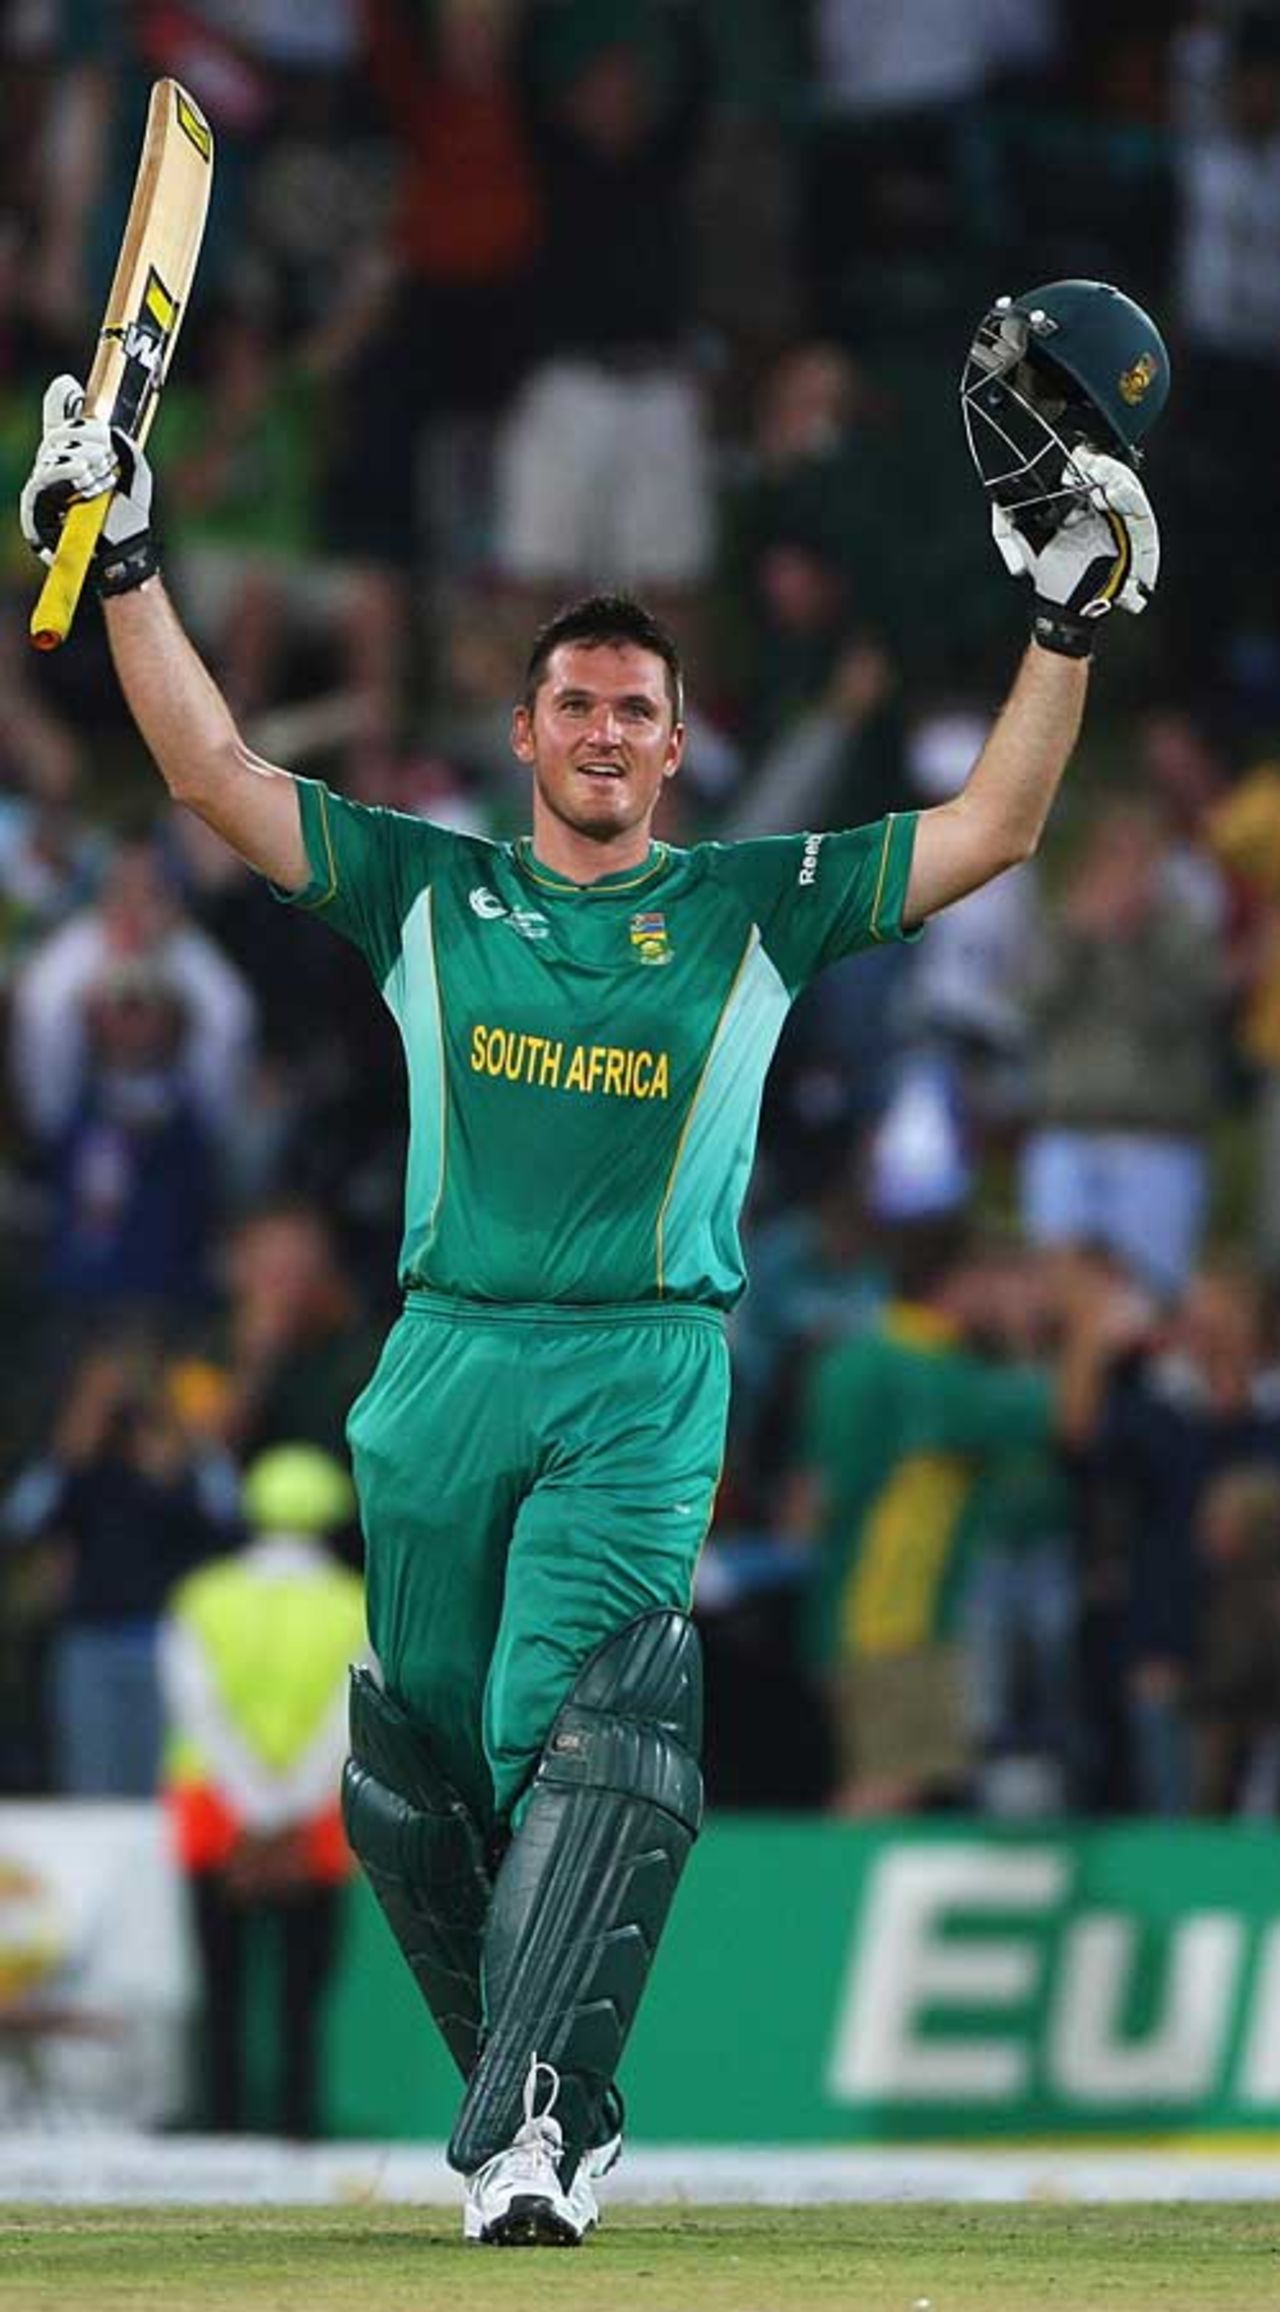 Graeme Smith led from the front and acknowledges his hundred, South Africa v England, ICC Champions Trophy, Group B, Centurion, September 27, 2009